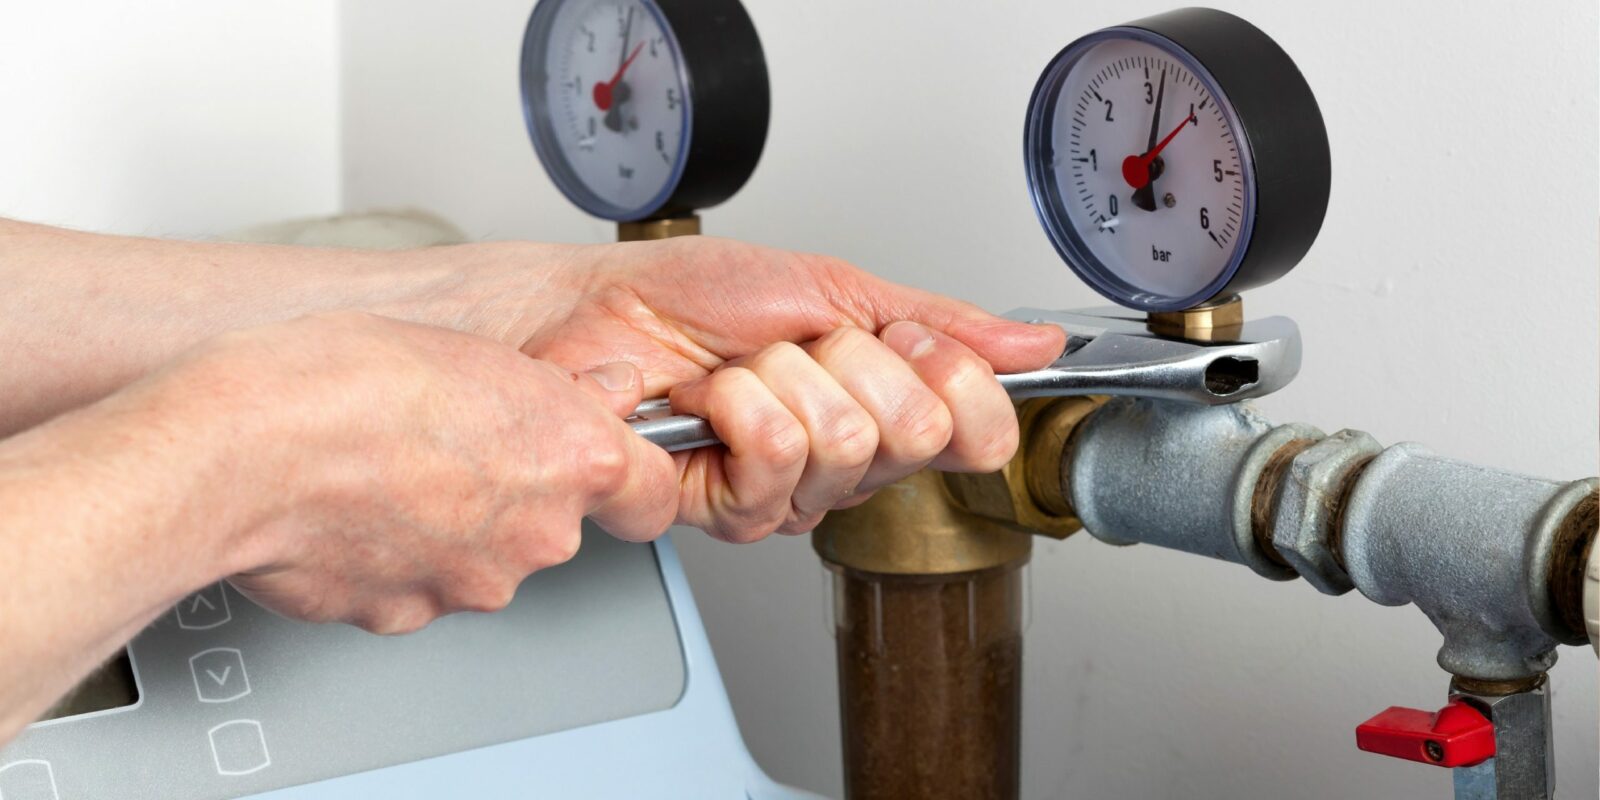 6 reasons to install a water softener